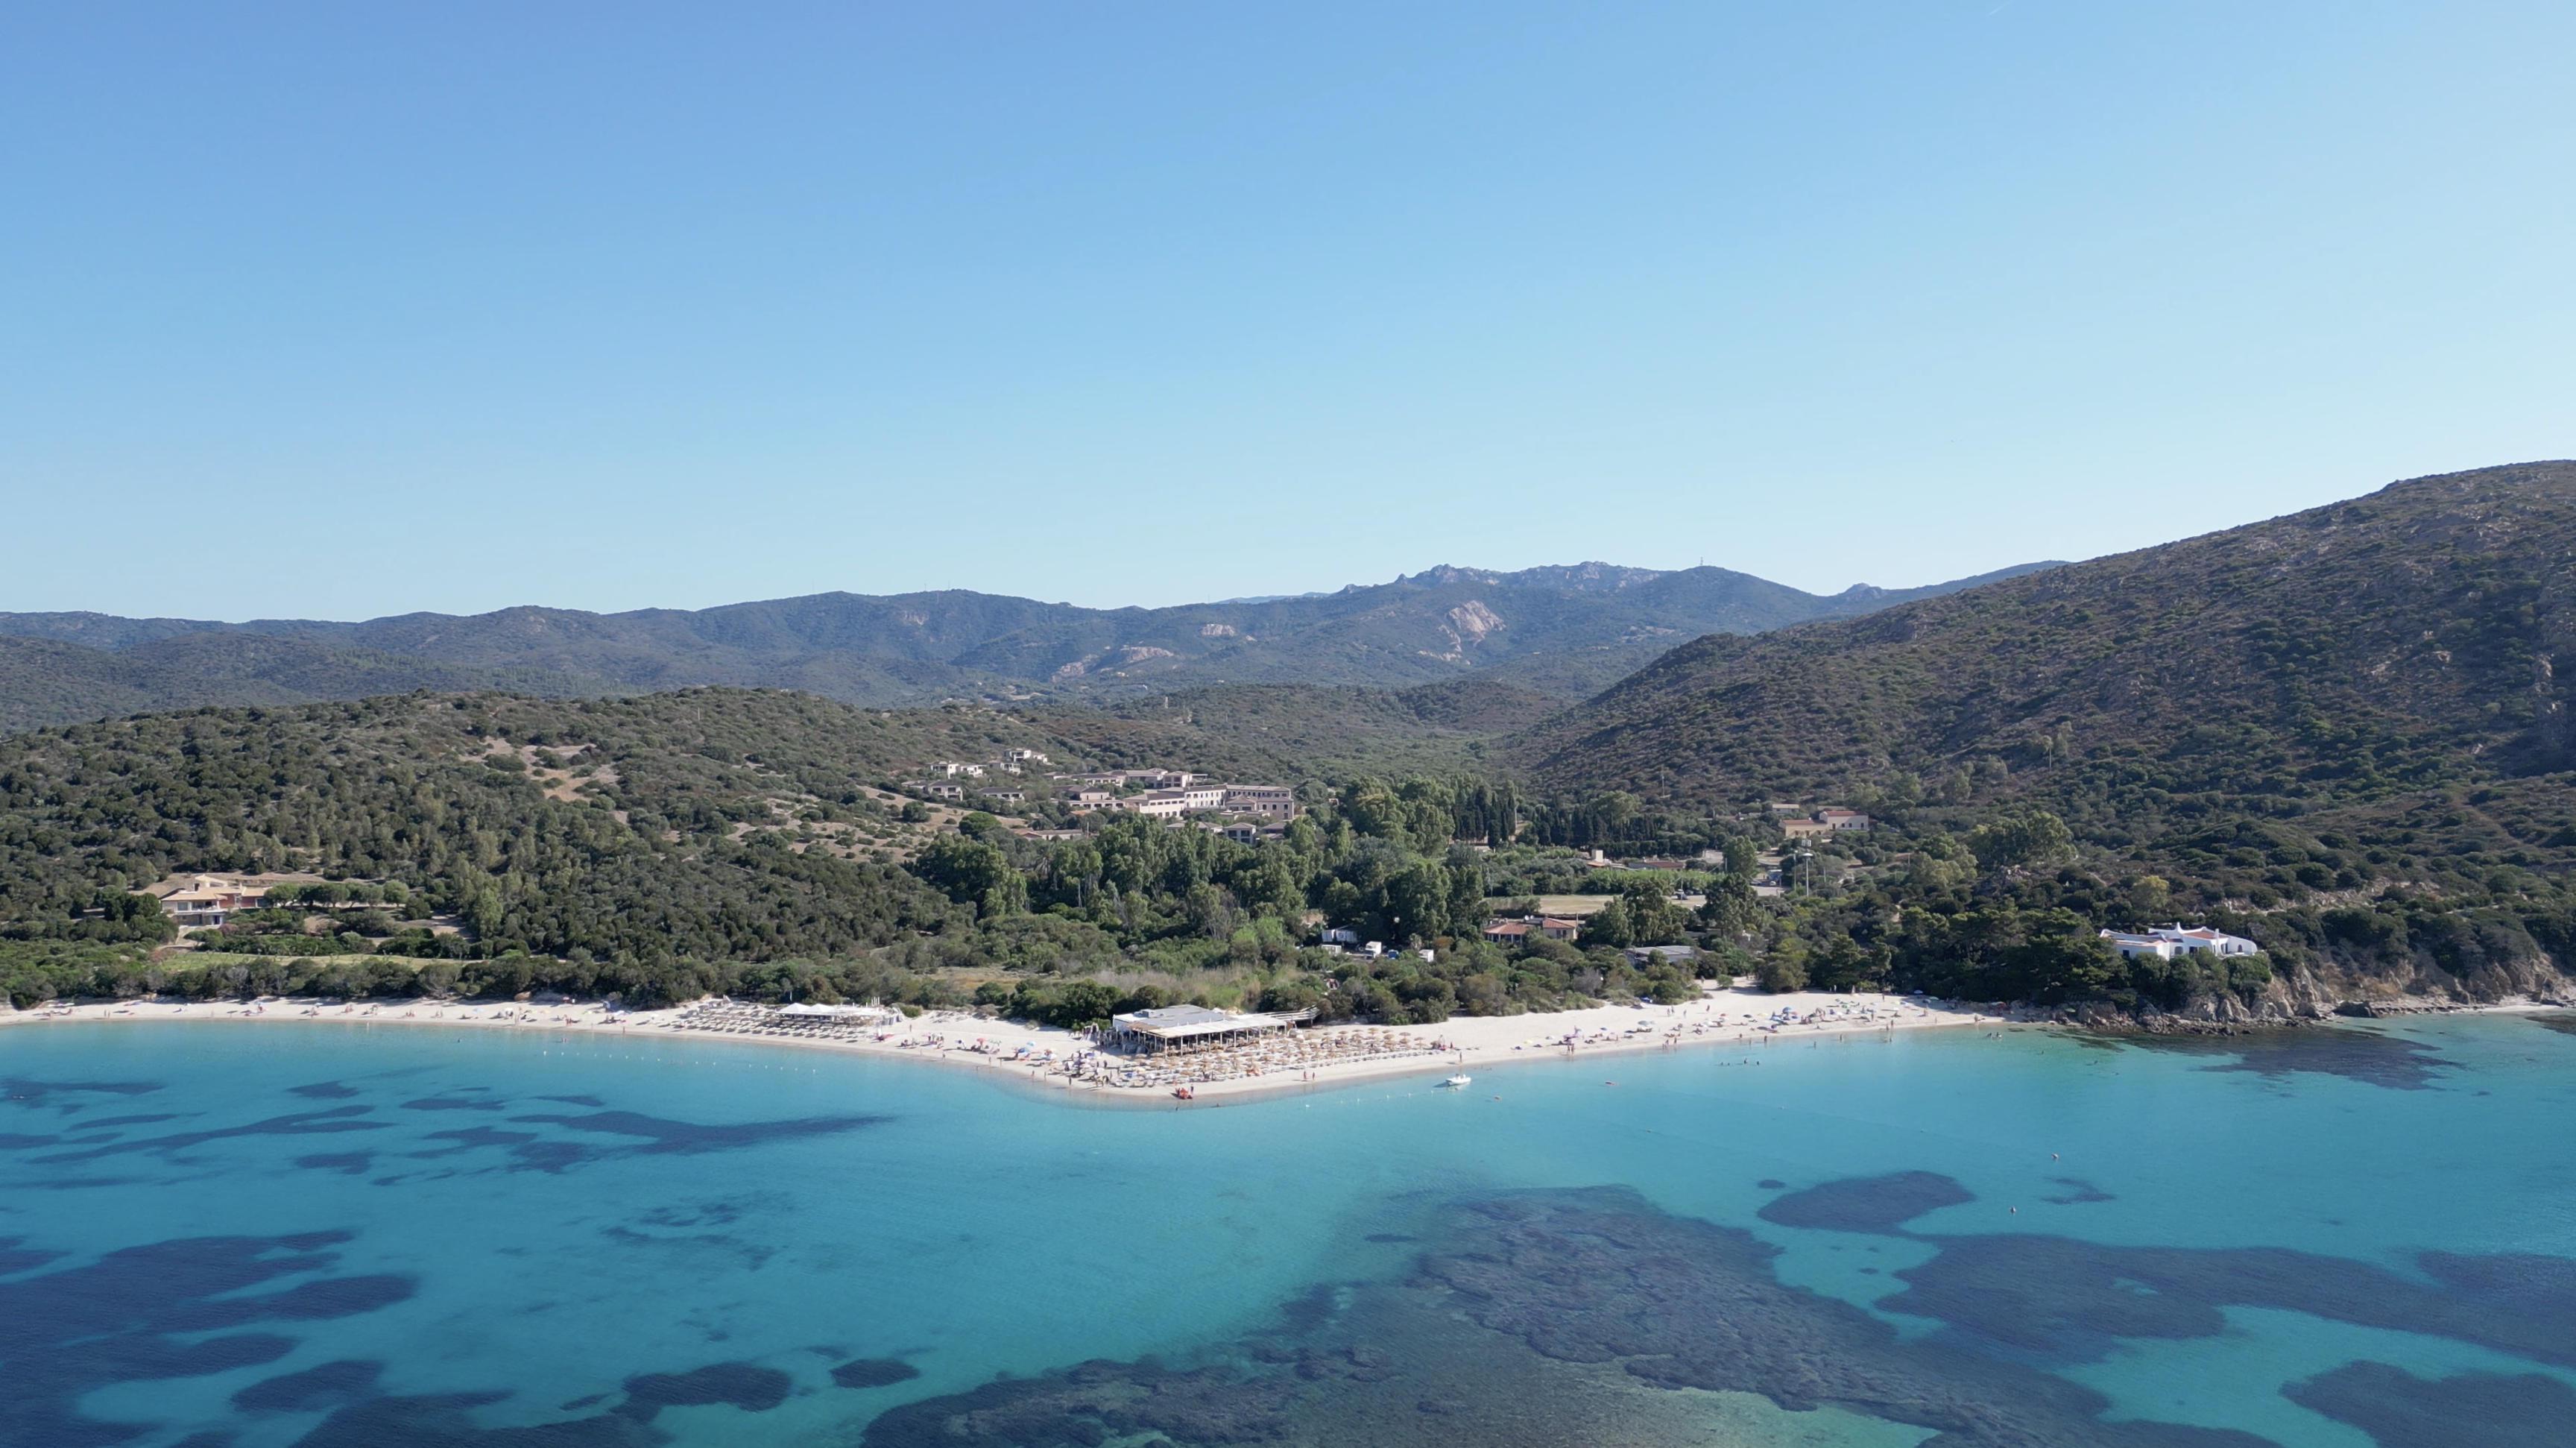 Tuerredda Bay: A Sardinian gem. Crystal-clear turquoise waters, sandy beach, and breathtaking scenery. Perfect for sunbathing and swimming.